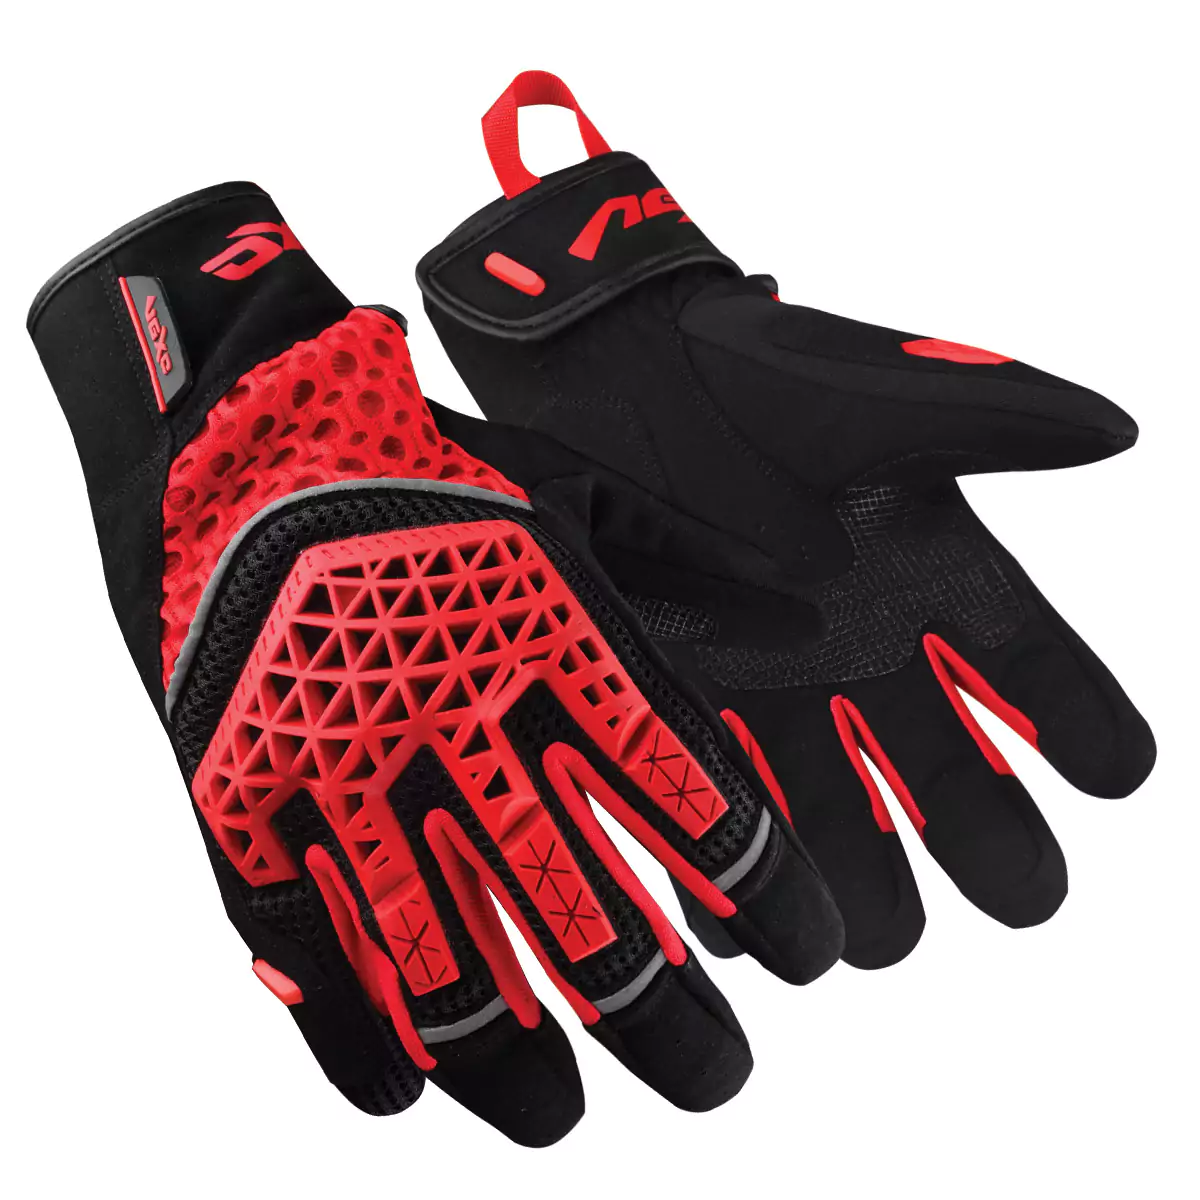 Pair of lightweight and breathable motorcycle motocross gloves designed for comfort and grip.